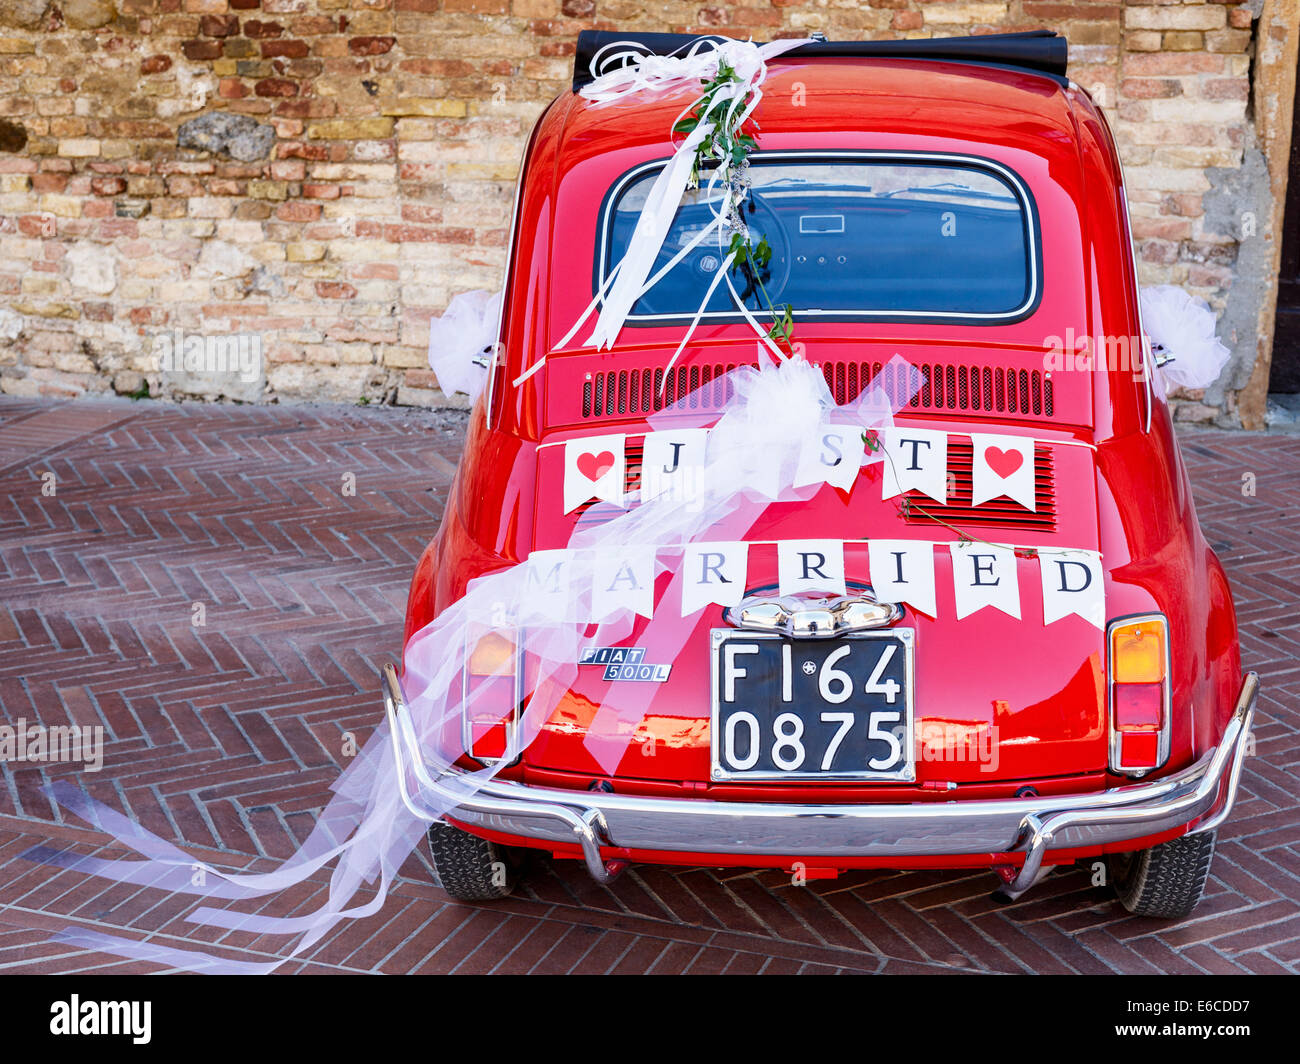 Just Married written on the rear of a red Fiat 500, San Gimignano, Tuscany, Italy Stock Photo